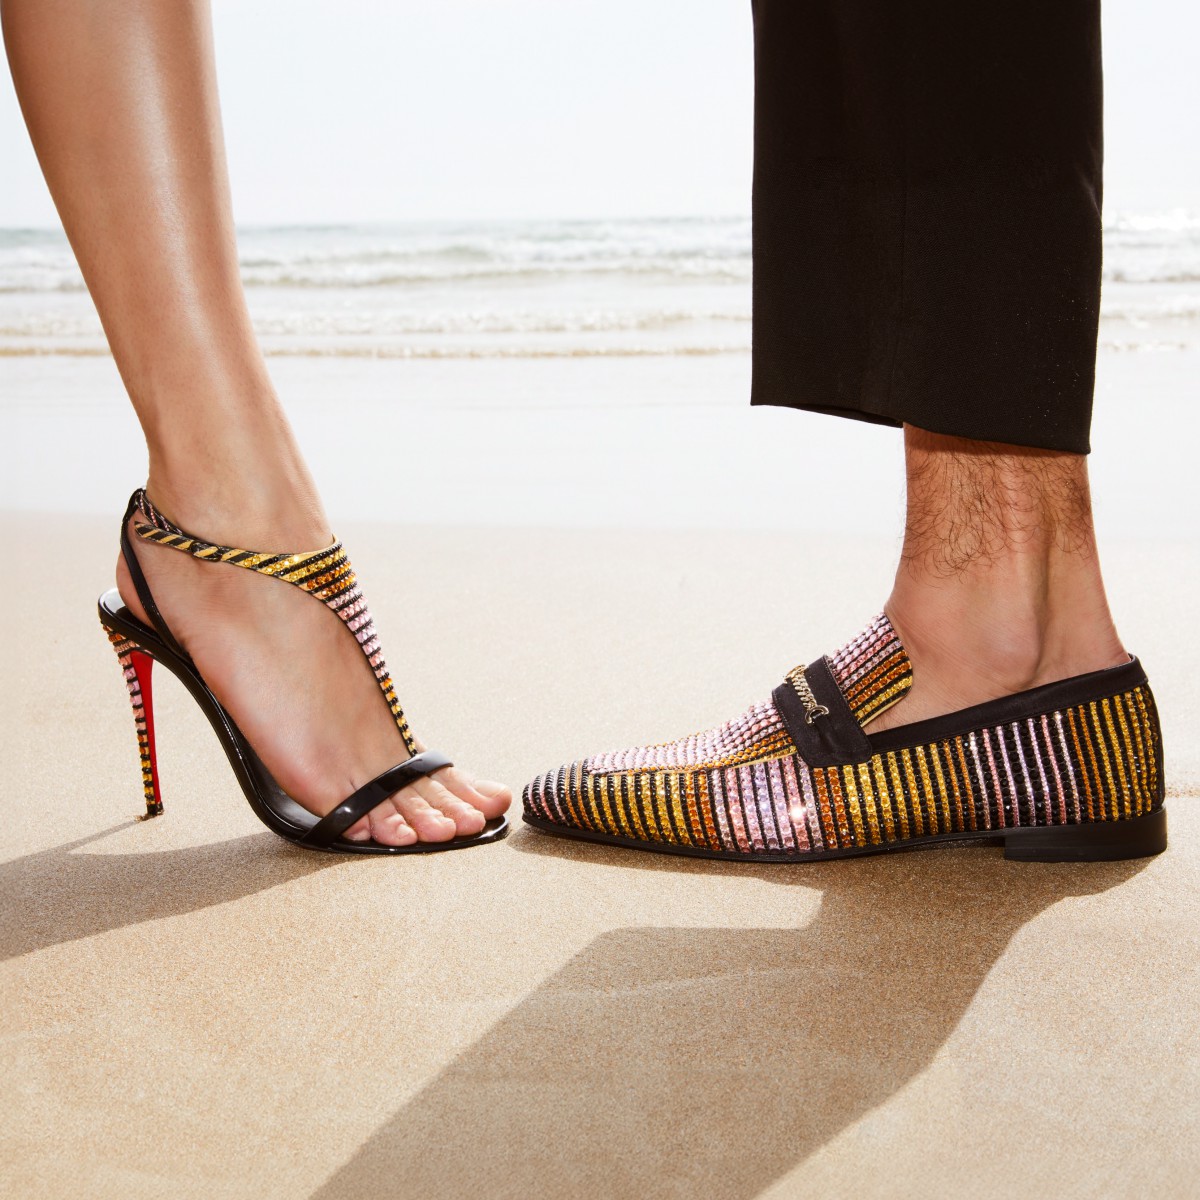 Shoes - Athina Strass Aftersun - Christian Louboutin